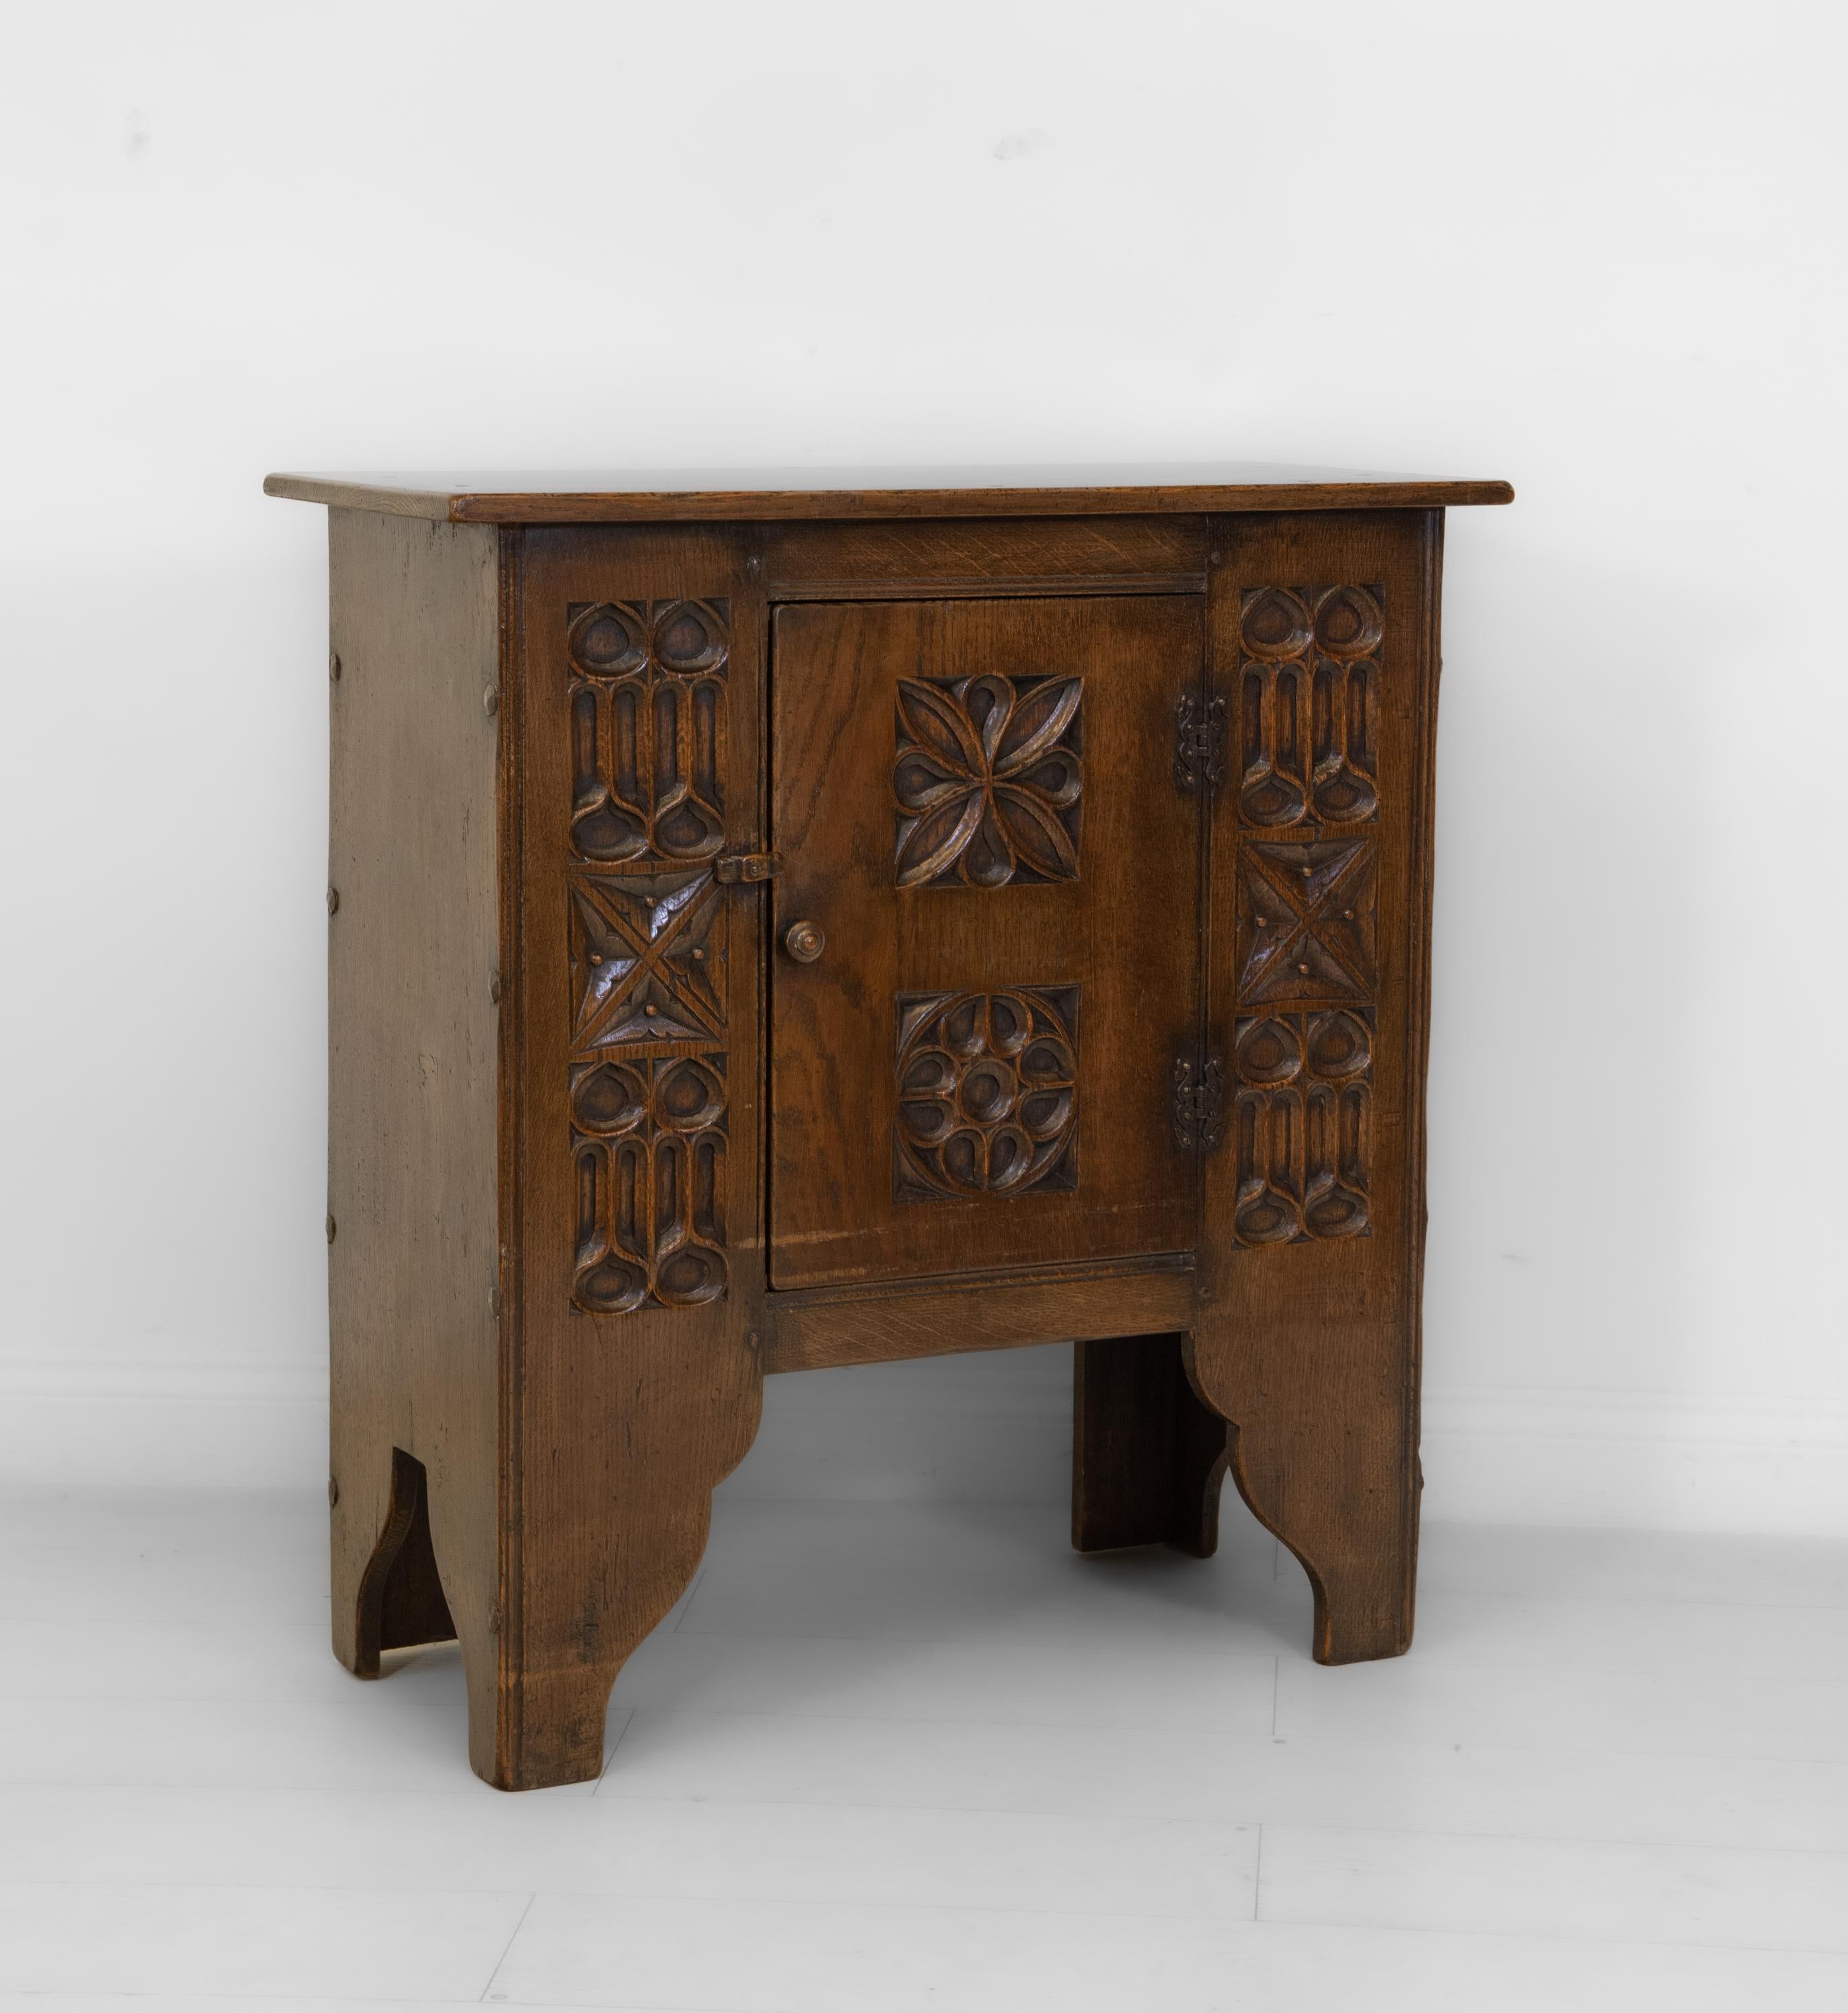 A Gothic Revival carved oak cabinet of nice proportions. Circa late 20th century. 

The cabinet having hand carved gothic tracery decoration to the front, and hand made metal studs to the sides. The whole cabinet has been given an aged appearance